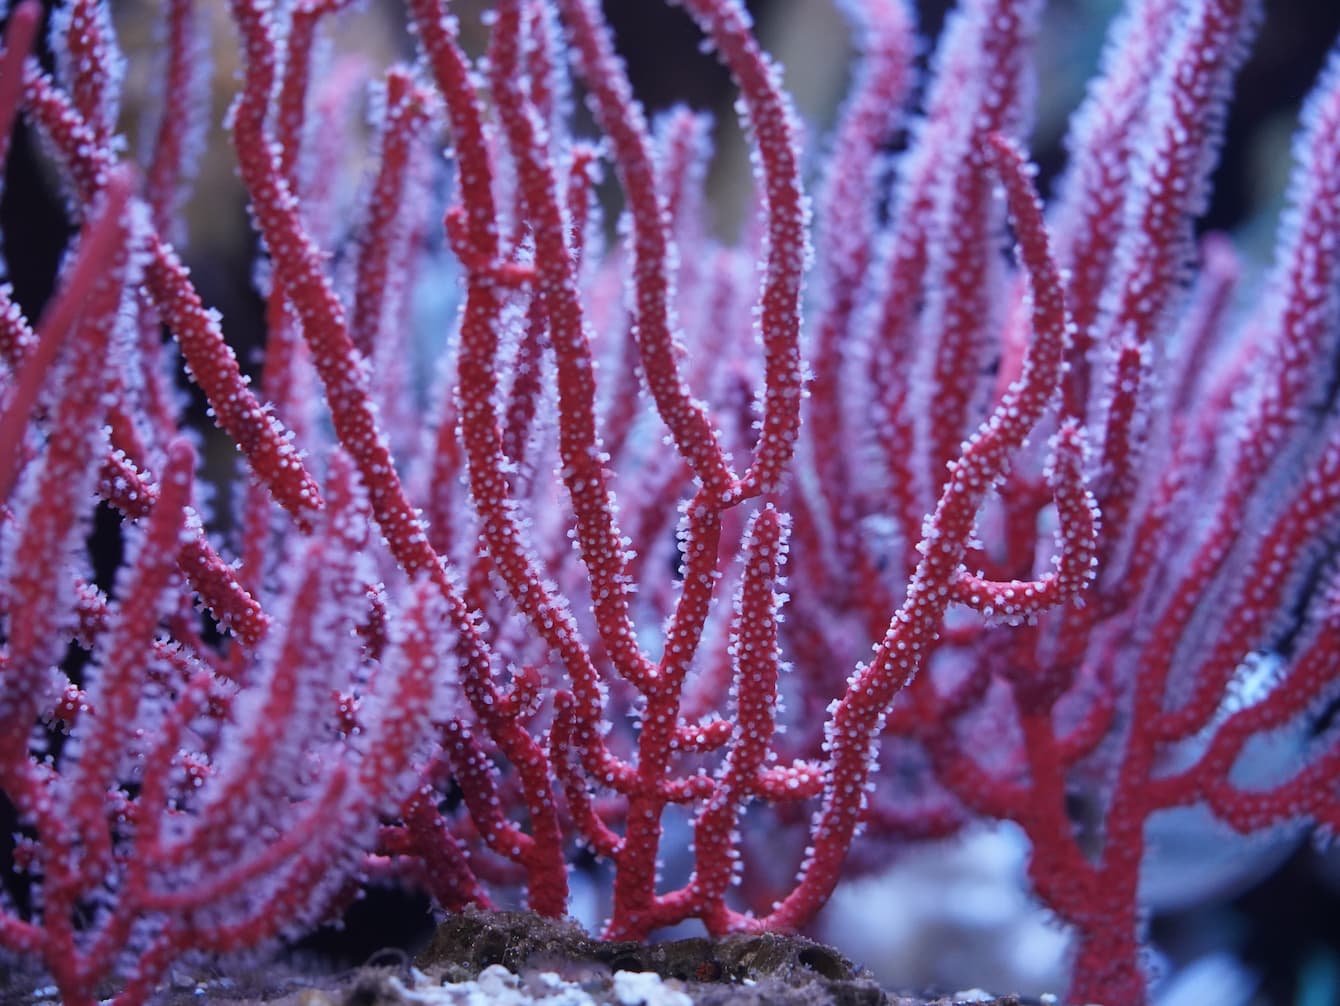 A swiftia coral. This coral is thin and branching; it is bright pink and dotted with small, white protrusions.